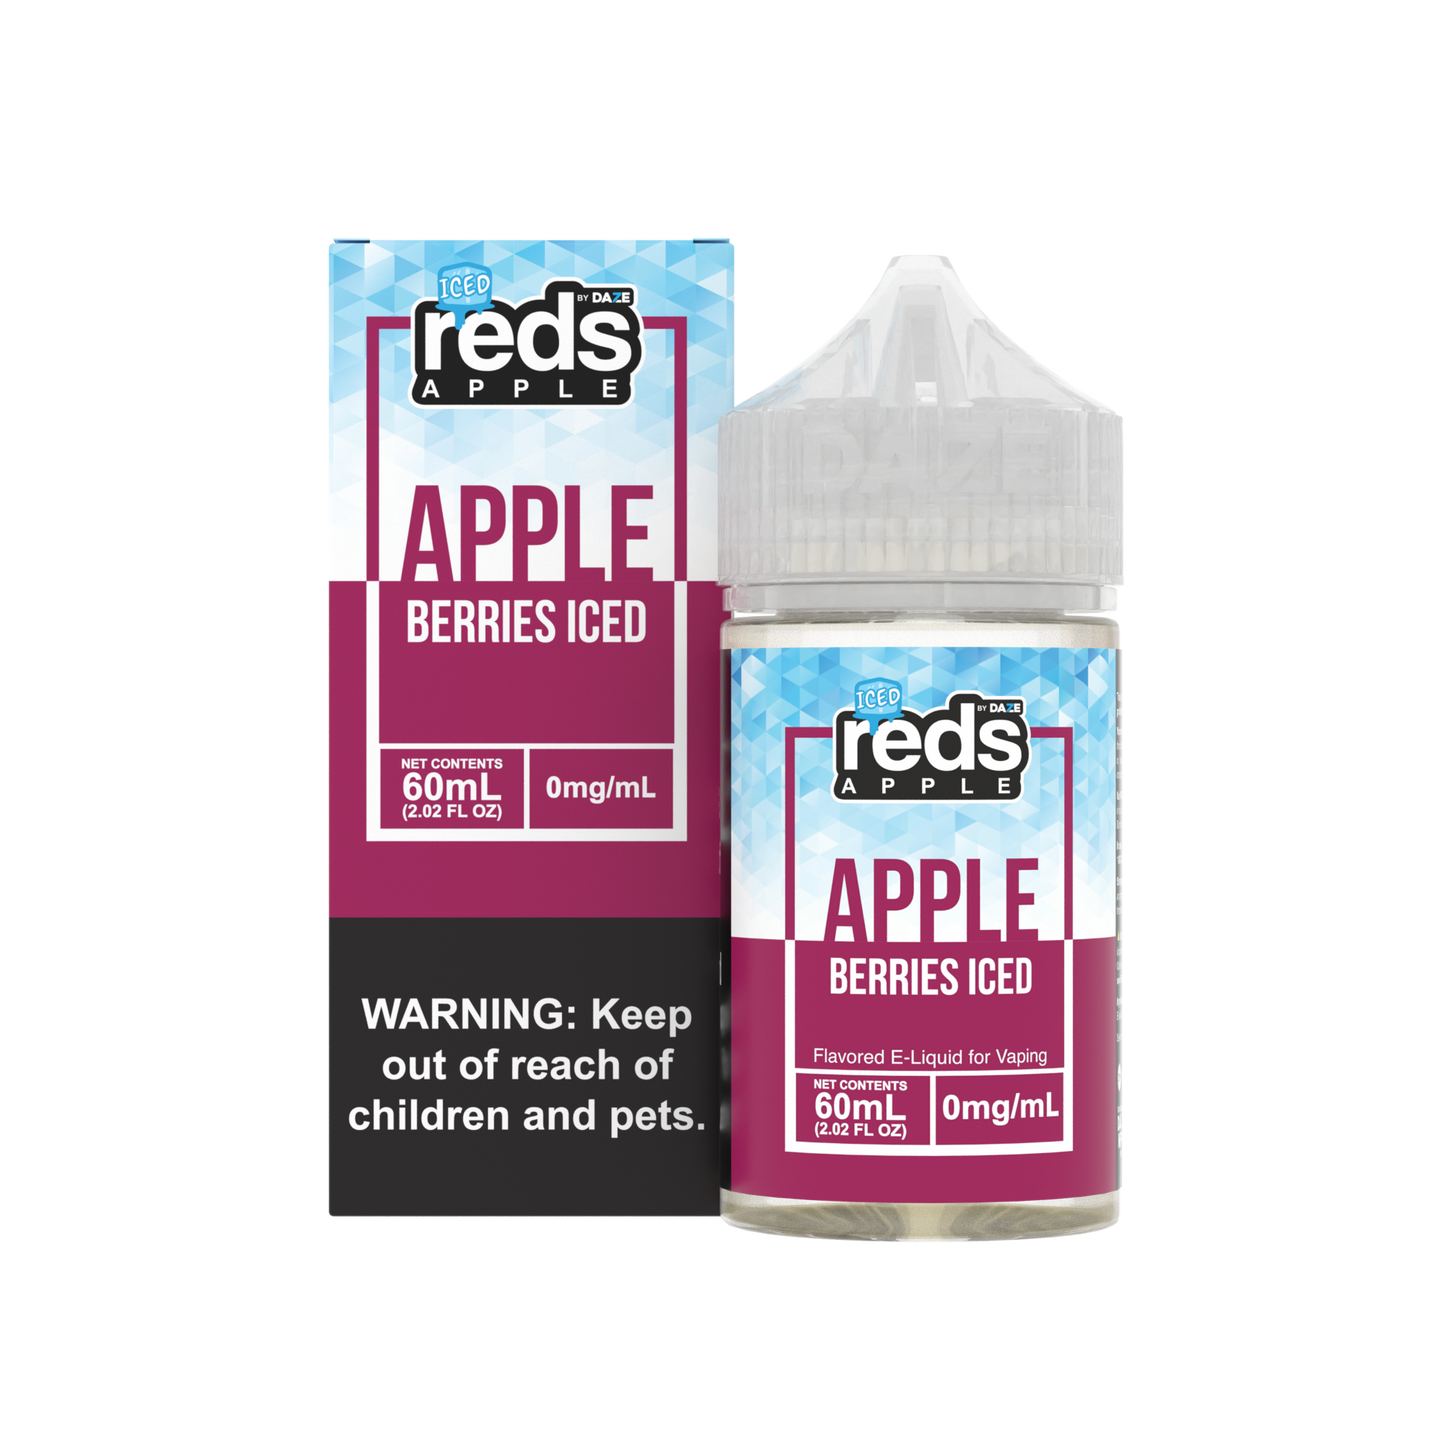 Reds: Apple Berries Iced